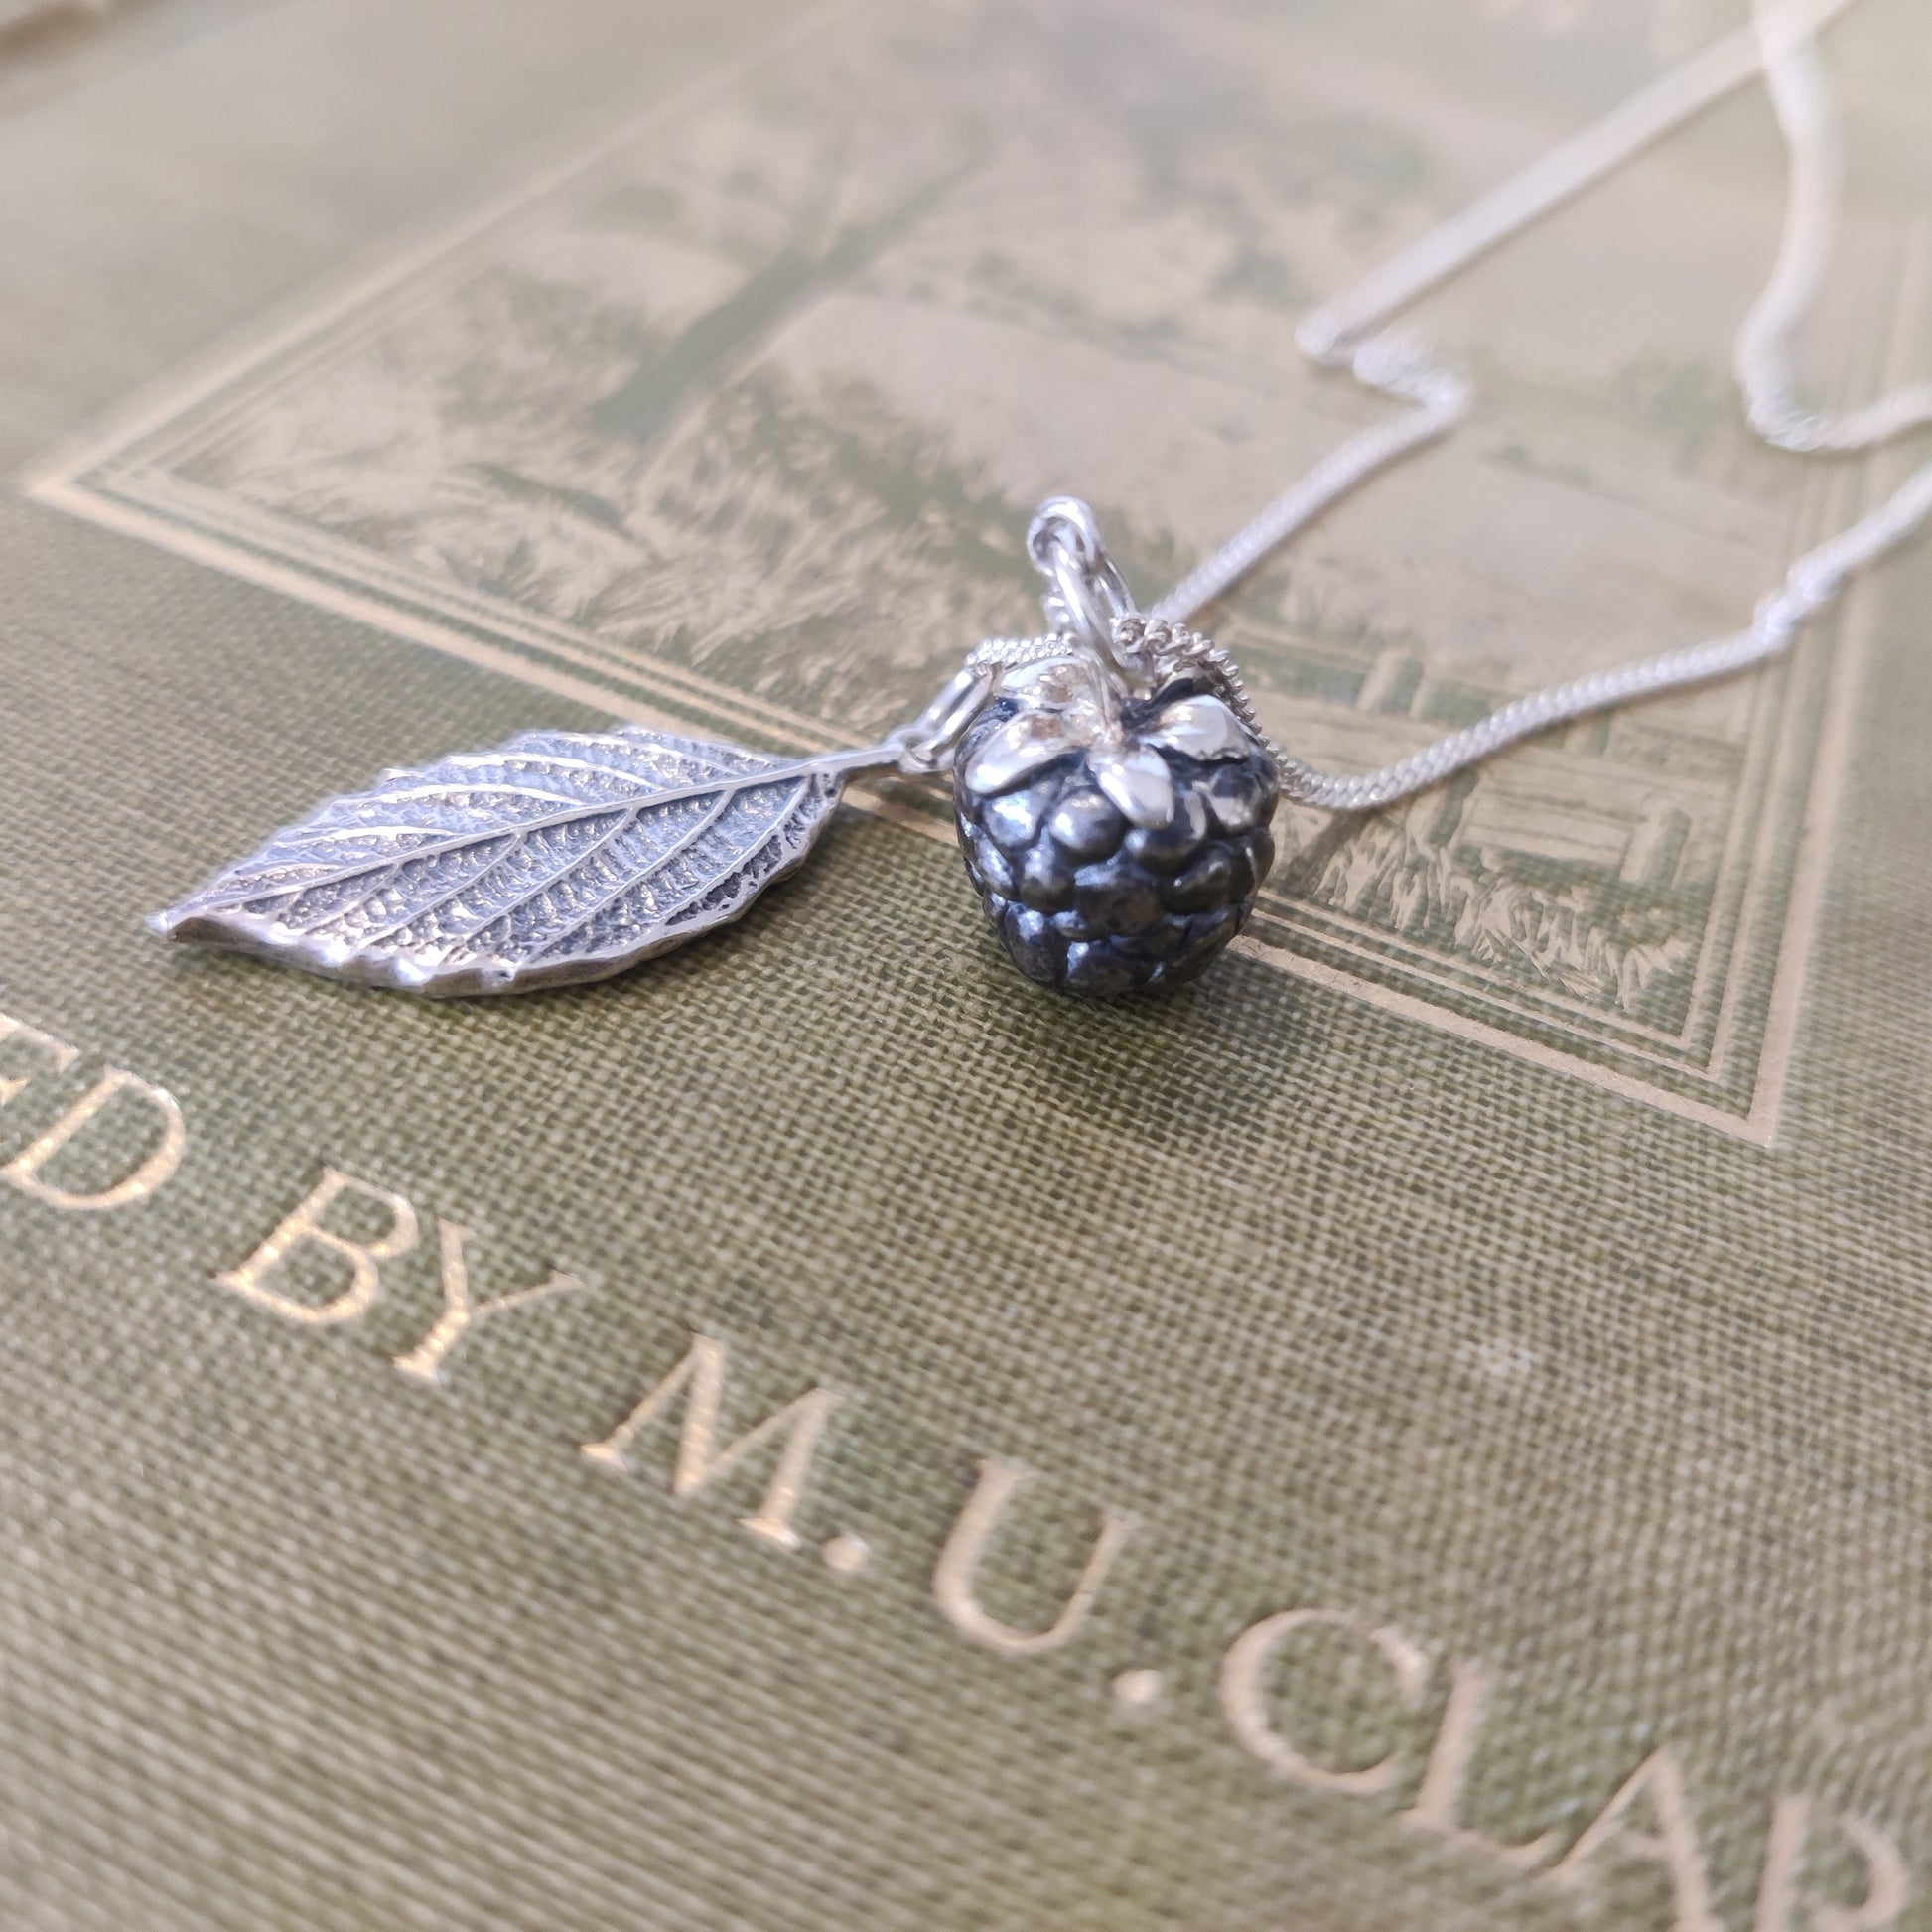 Blackberry charm necklace, handmade in sterling silver by Notion Jewellery.